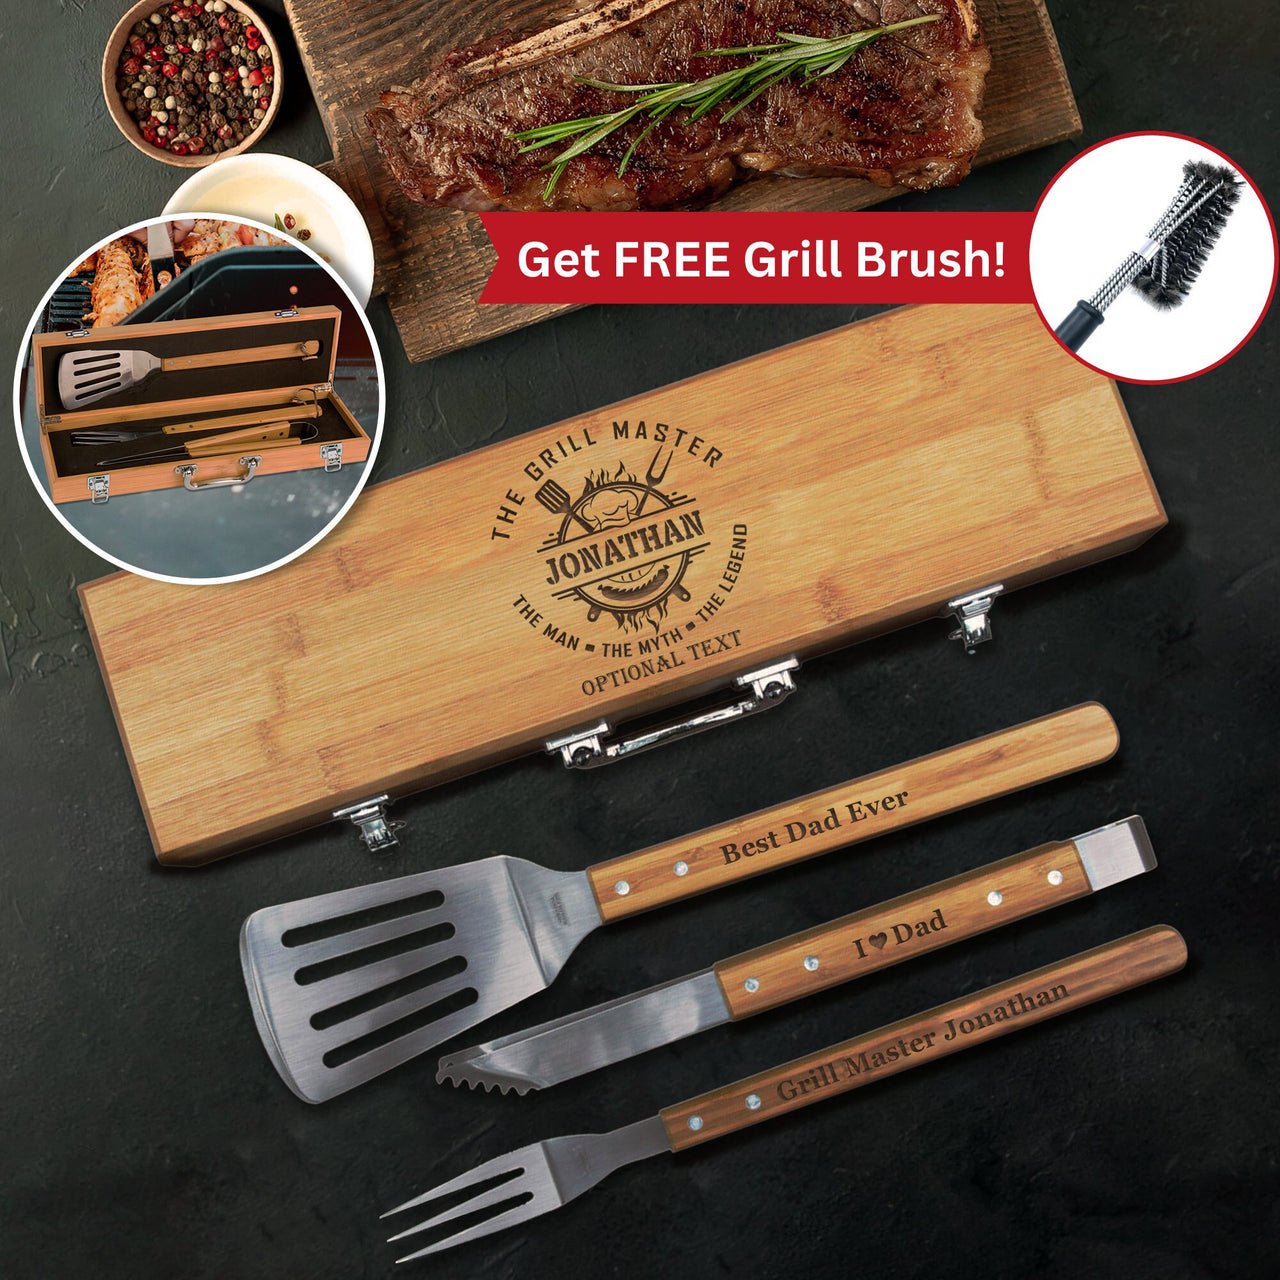 Premium Grill Gift - The Grill Master, The Man, The Myth, The Legend BBQ Set